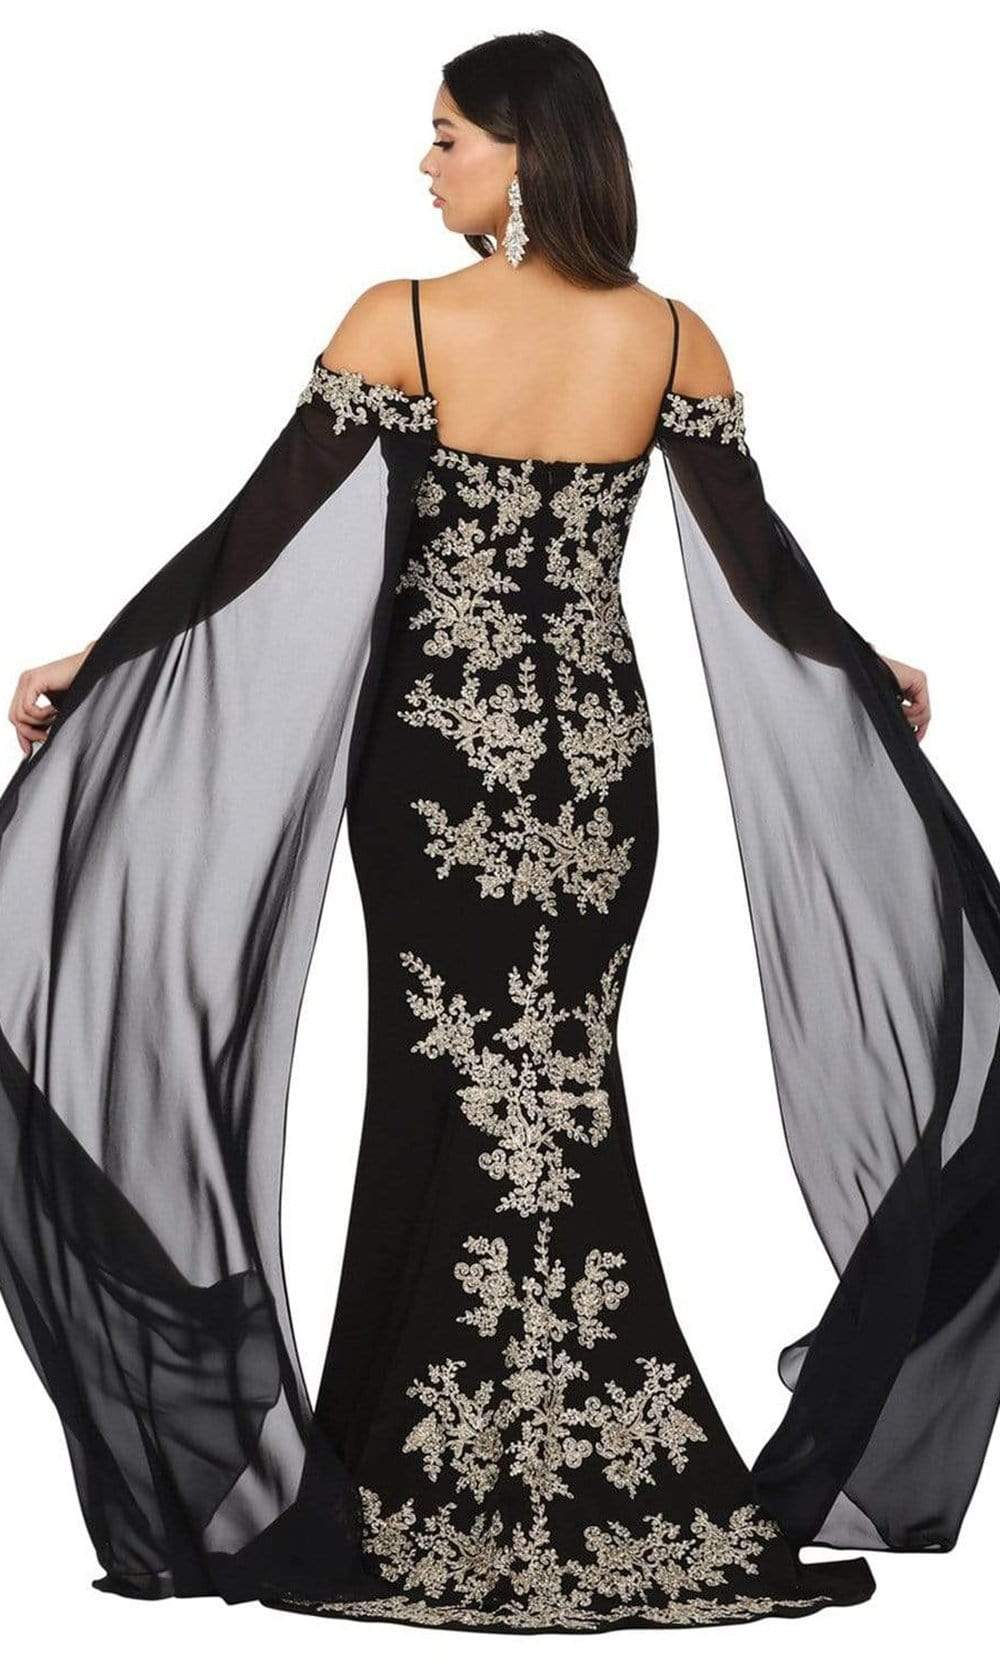 Dancing Queen - 4025 Sheer Cascade Sleeve Applique-Ornate Gown Prom Dresses